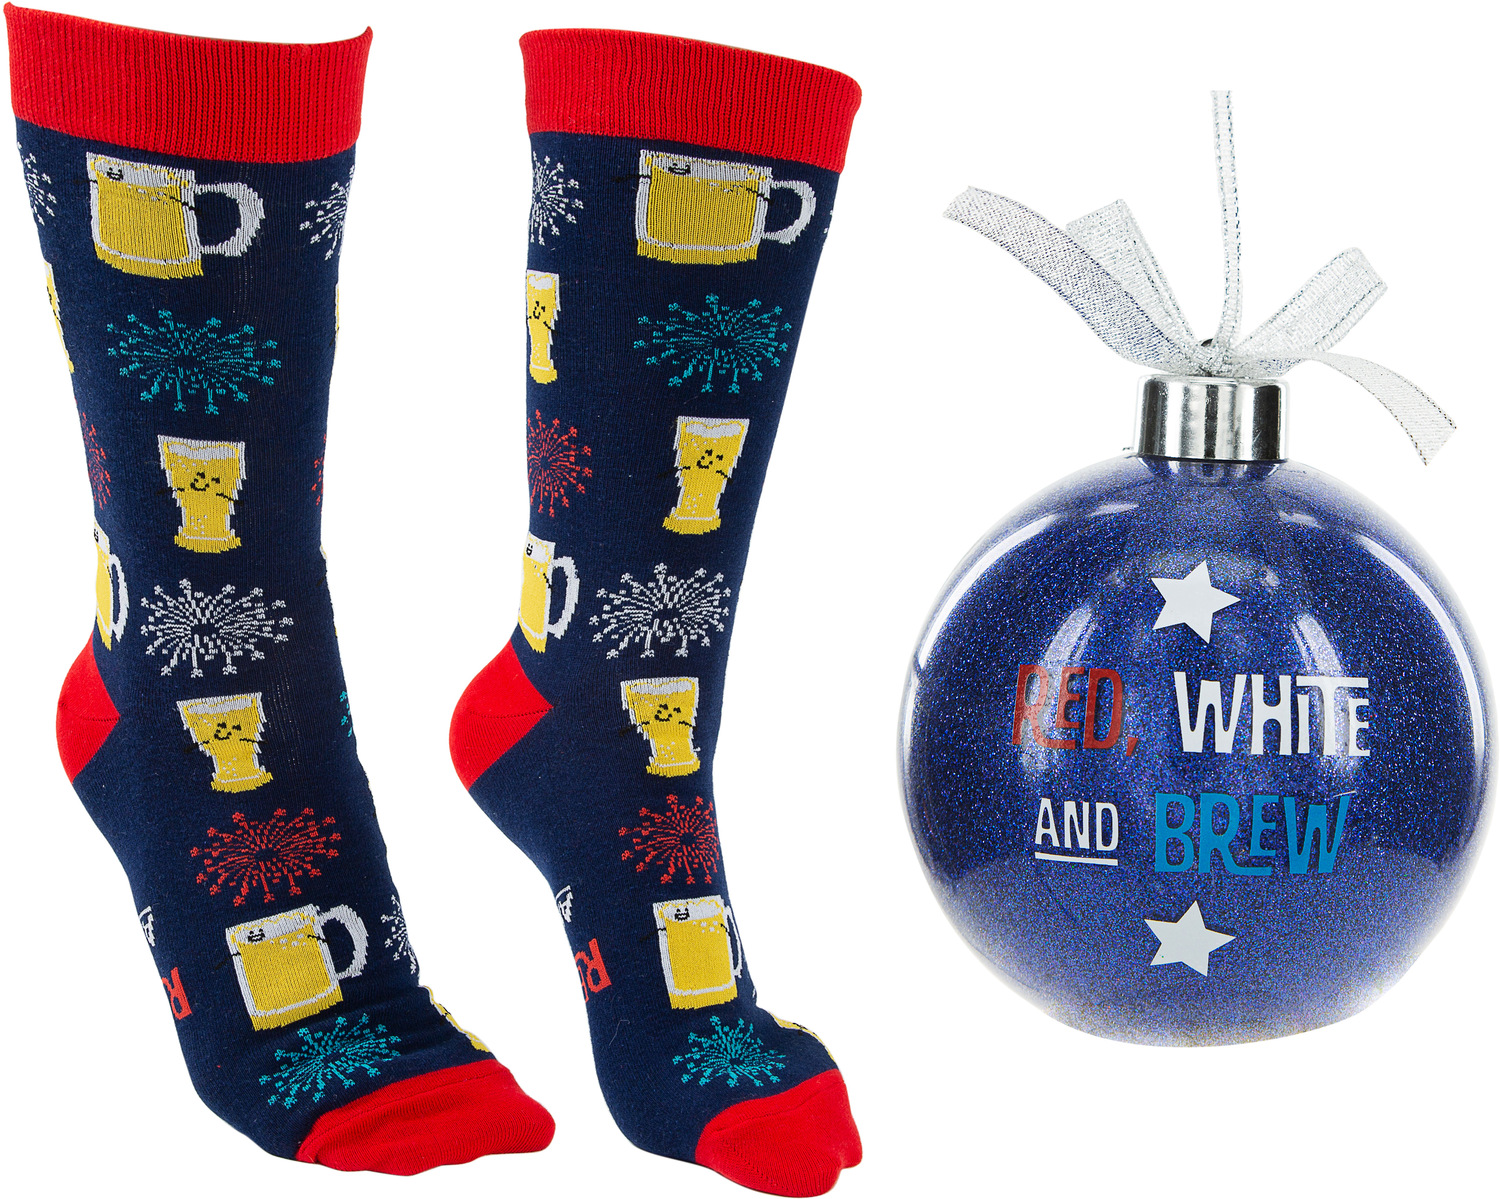 Red, White and Brew by Late Night Last Call - Red, White and Brew - 4" Ornament  with Unisex Holiday Socks